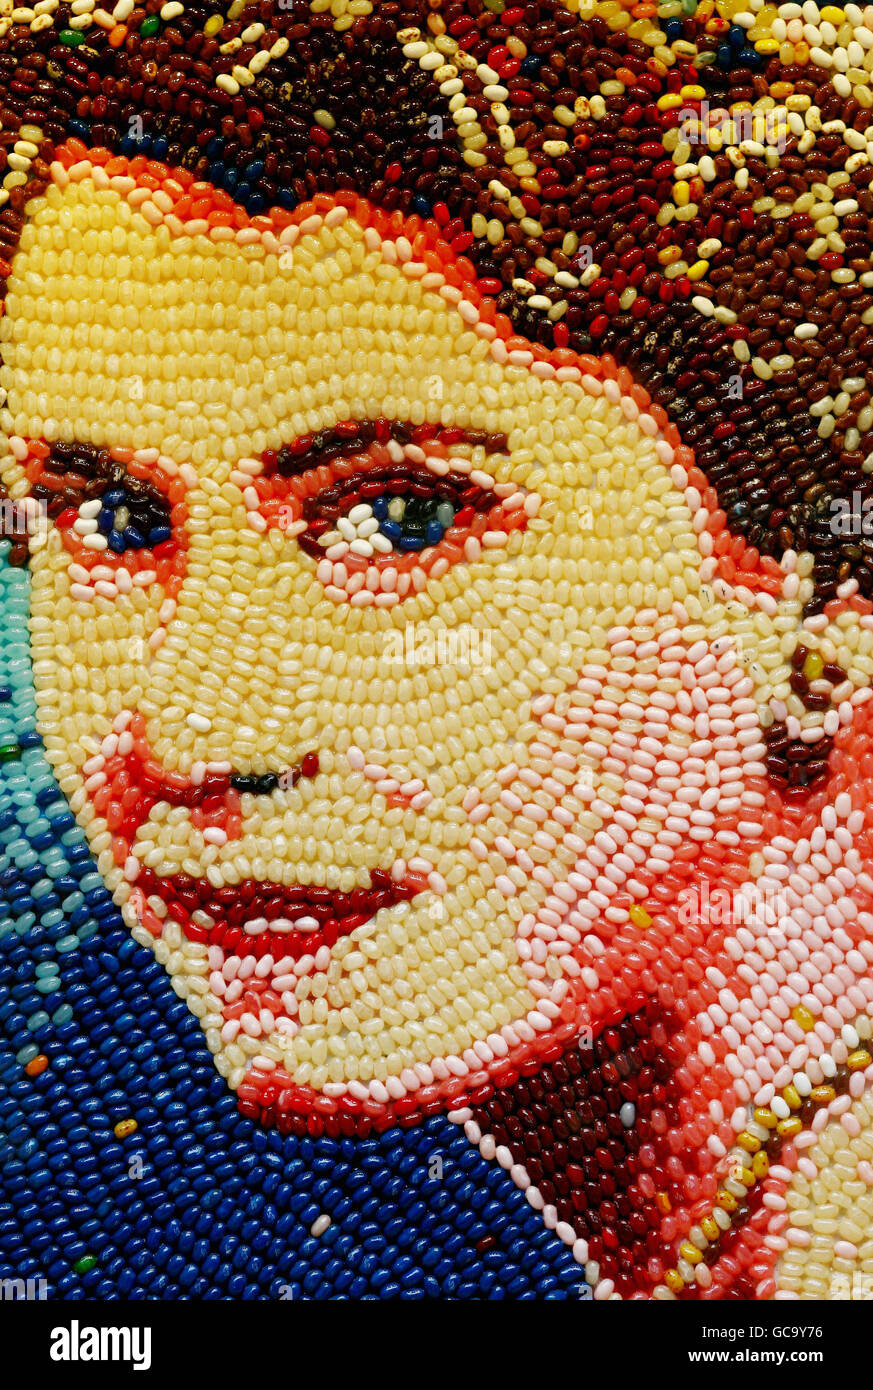 The 4ft square mosaic of Queen Elizabeth II currently on display in Fizziwig's Sweet Emporium which has been created by the firm Jelly Belly out of around 10,000 jelly beans. Stock Photo